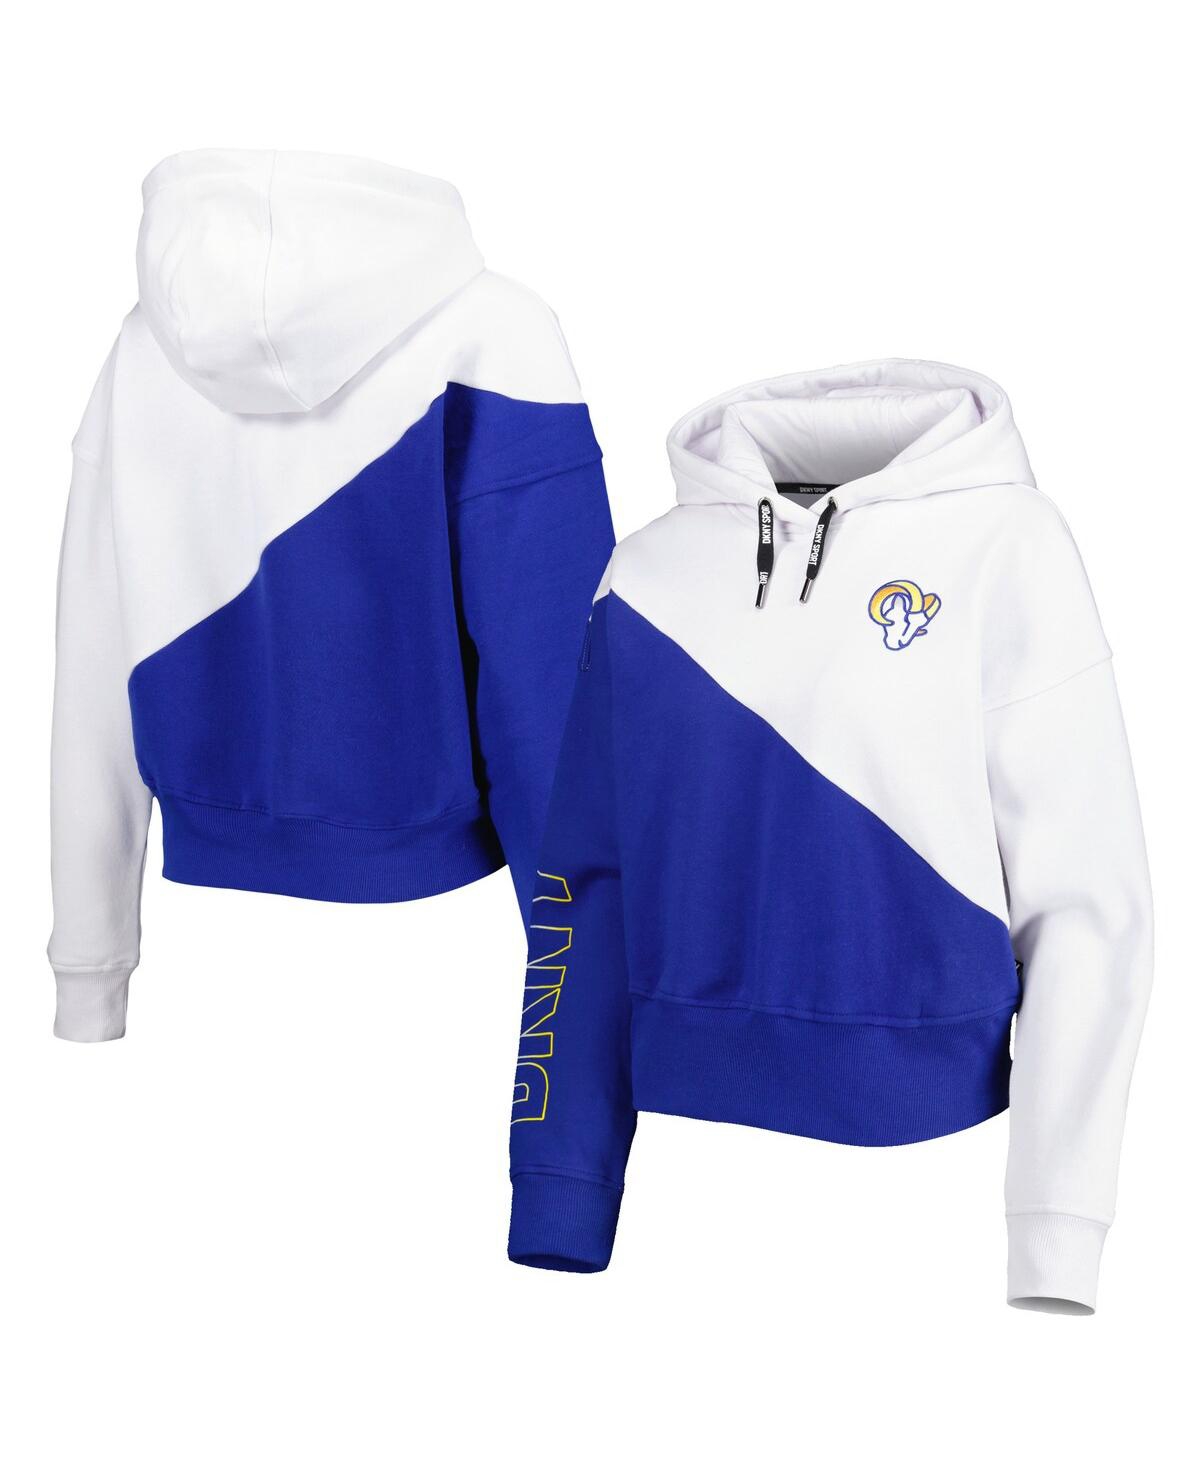 Women's Dkny Sport White and Royal Los Angeles Rams Bobbi Color Blocked Pullover Hoodie - White, Royal